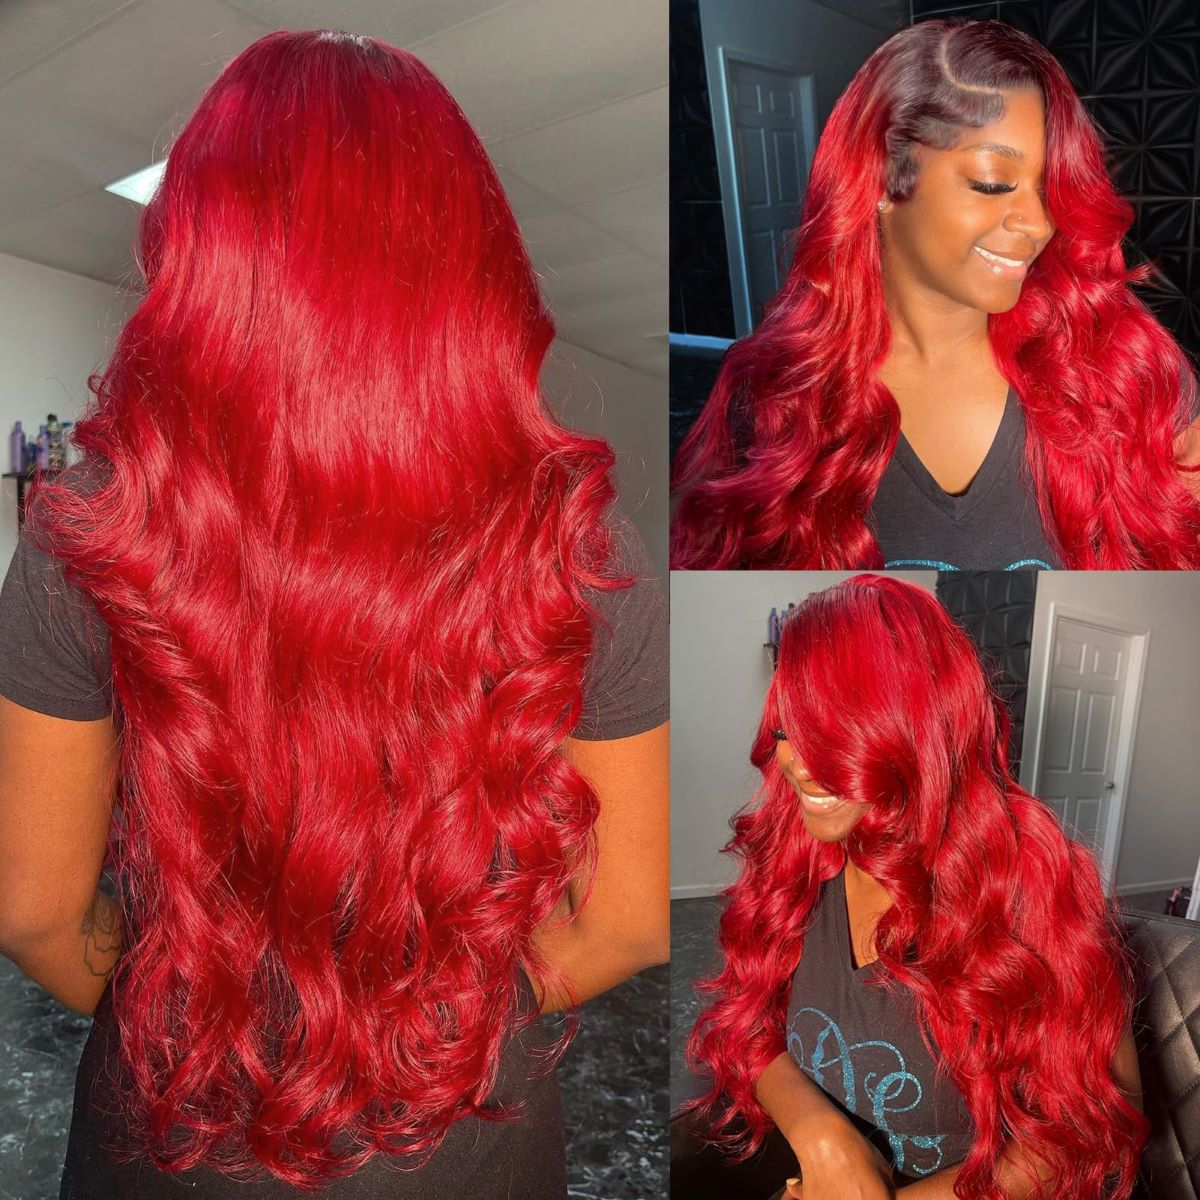 Discover The Best Deals On Red Wigs For Black Women!